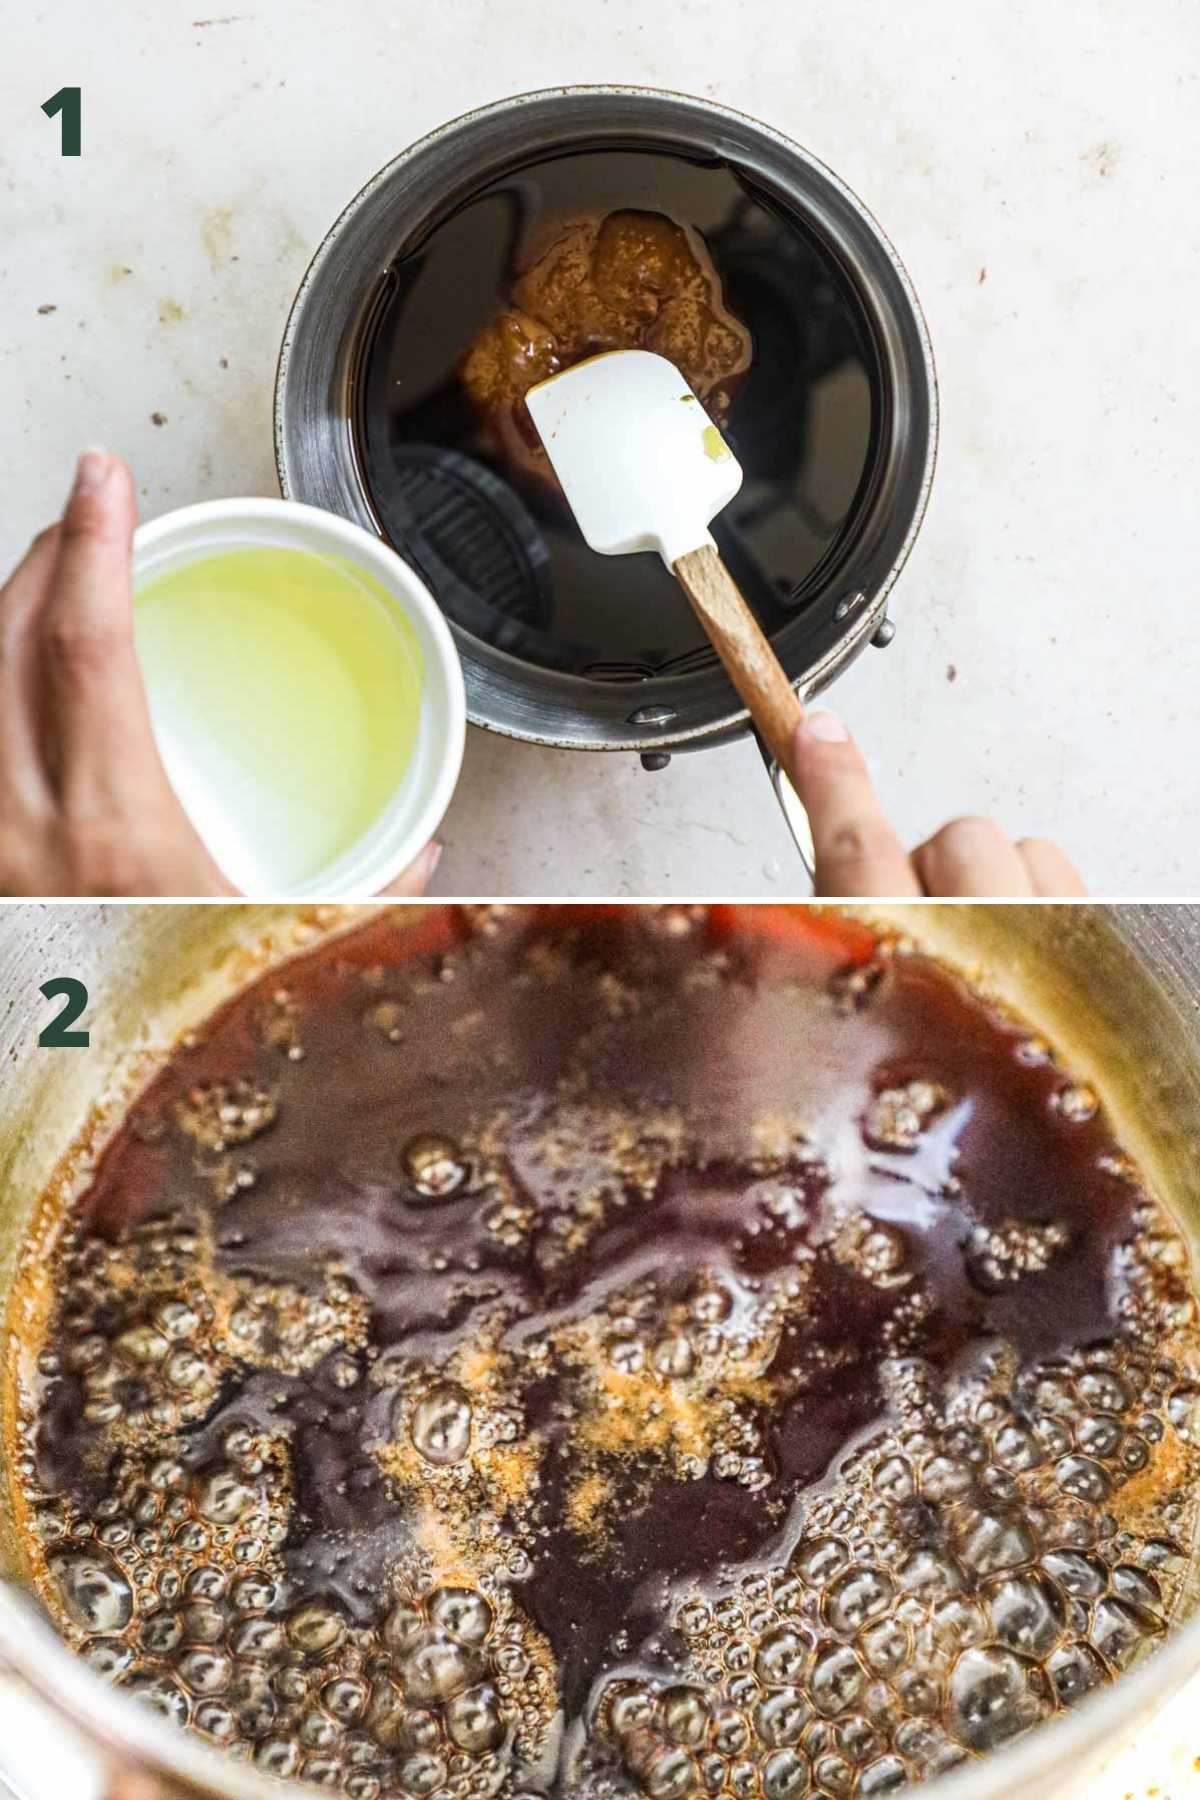 Steps to make gluten free honey teriyaki sauce, including adding the ingredients to a saucepan and simmering.